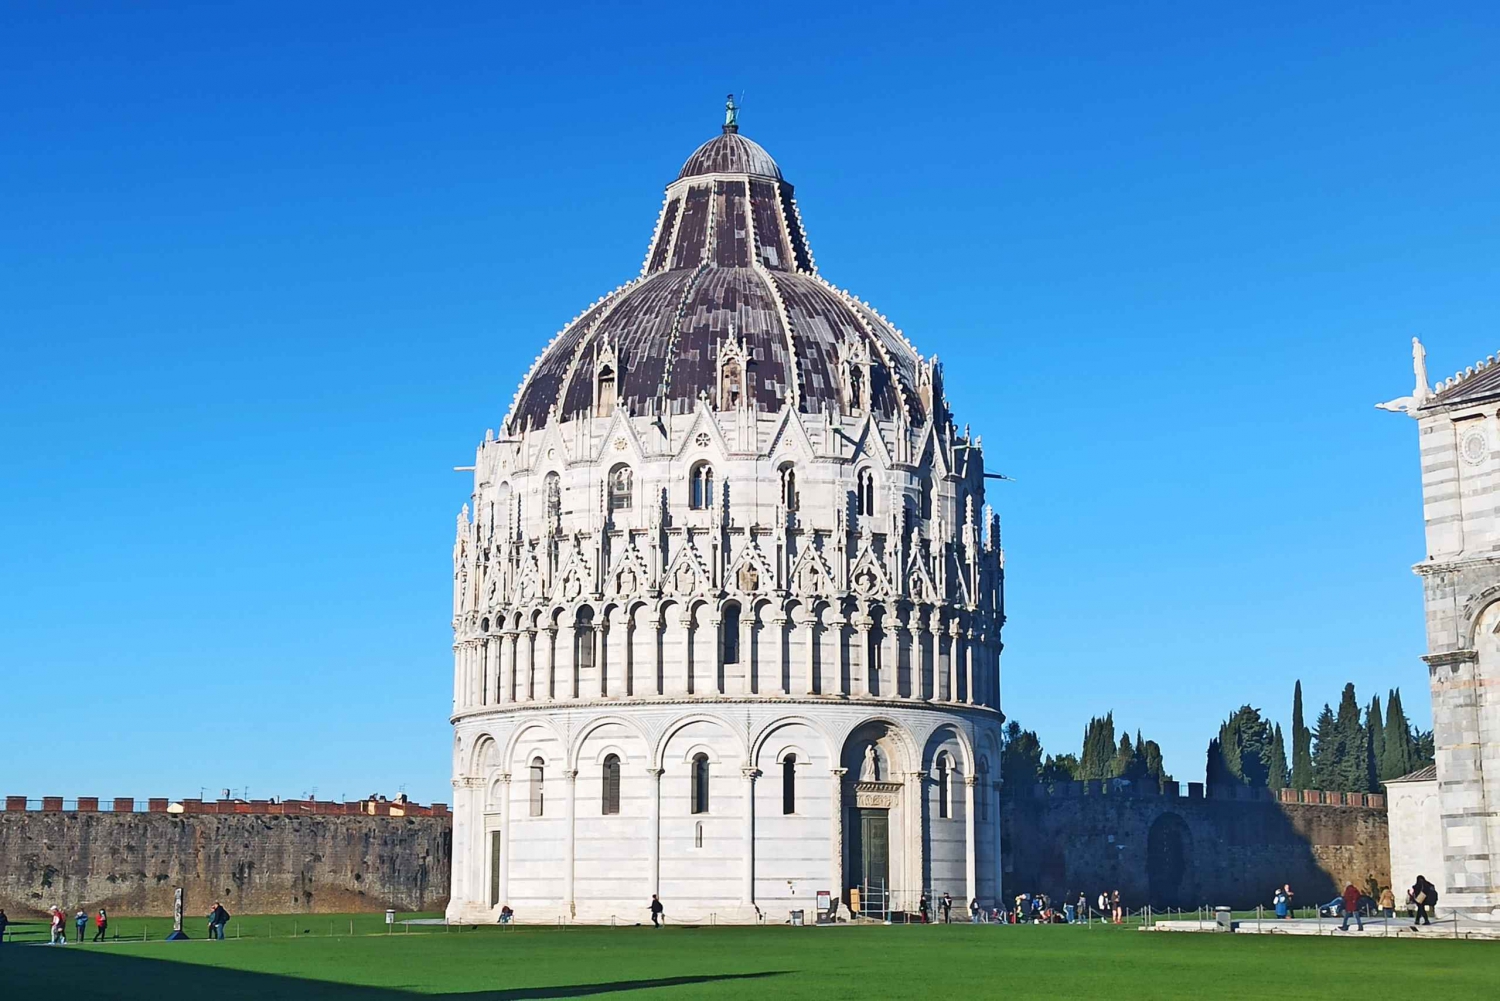 From Florence: Pisa/Chianti Half Day Tour with Wine Tasting